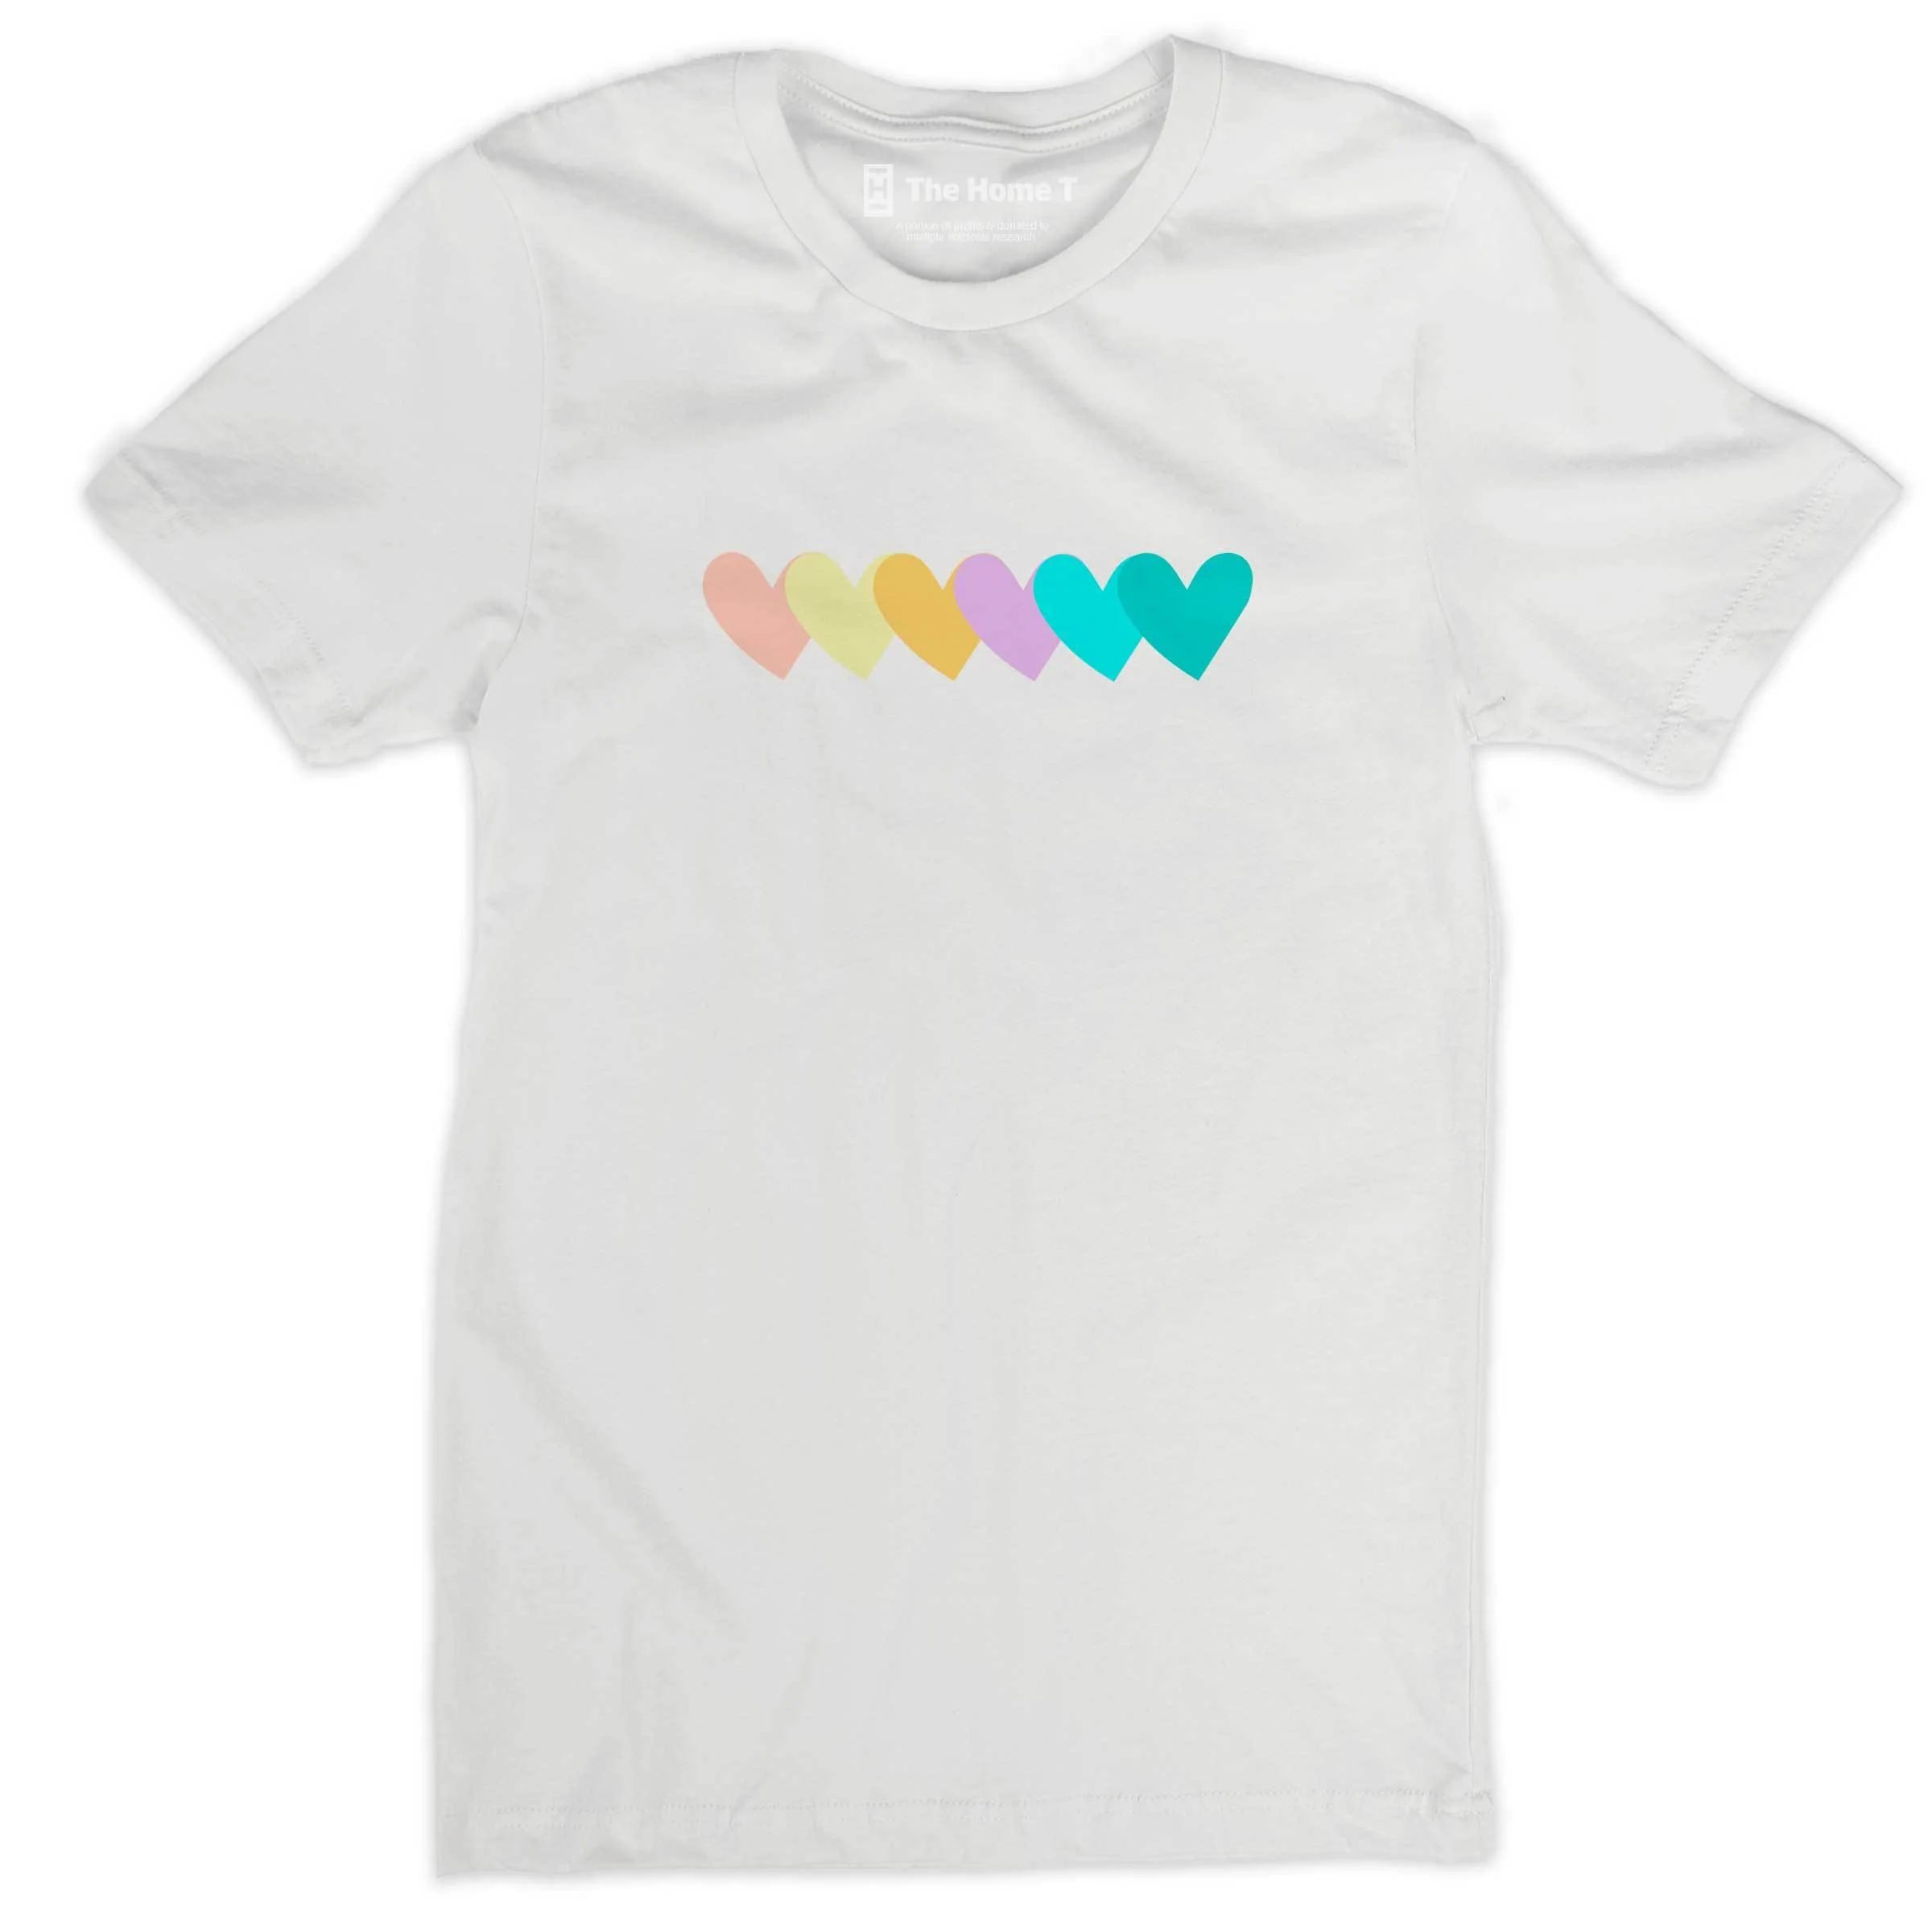 Colorful Hearts | The Home T